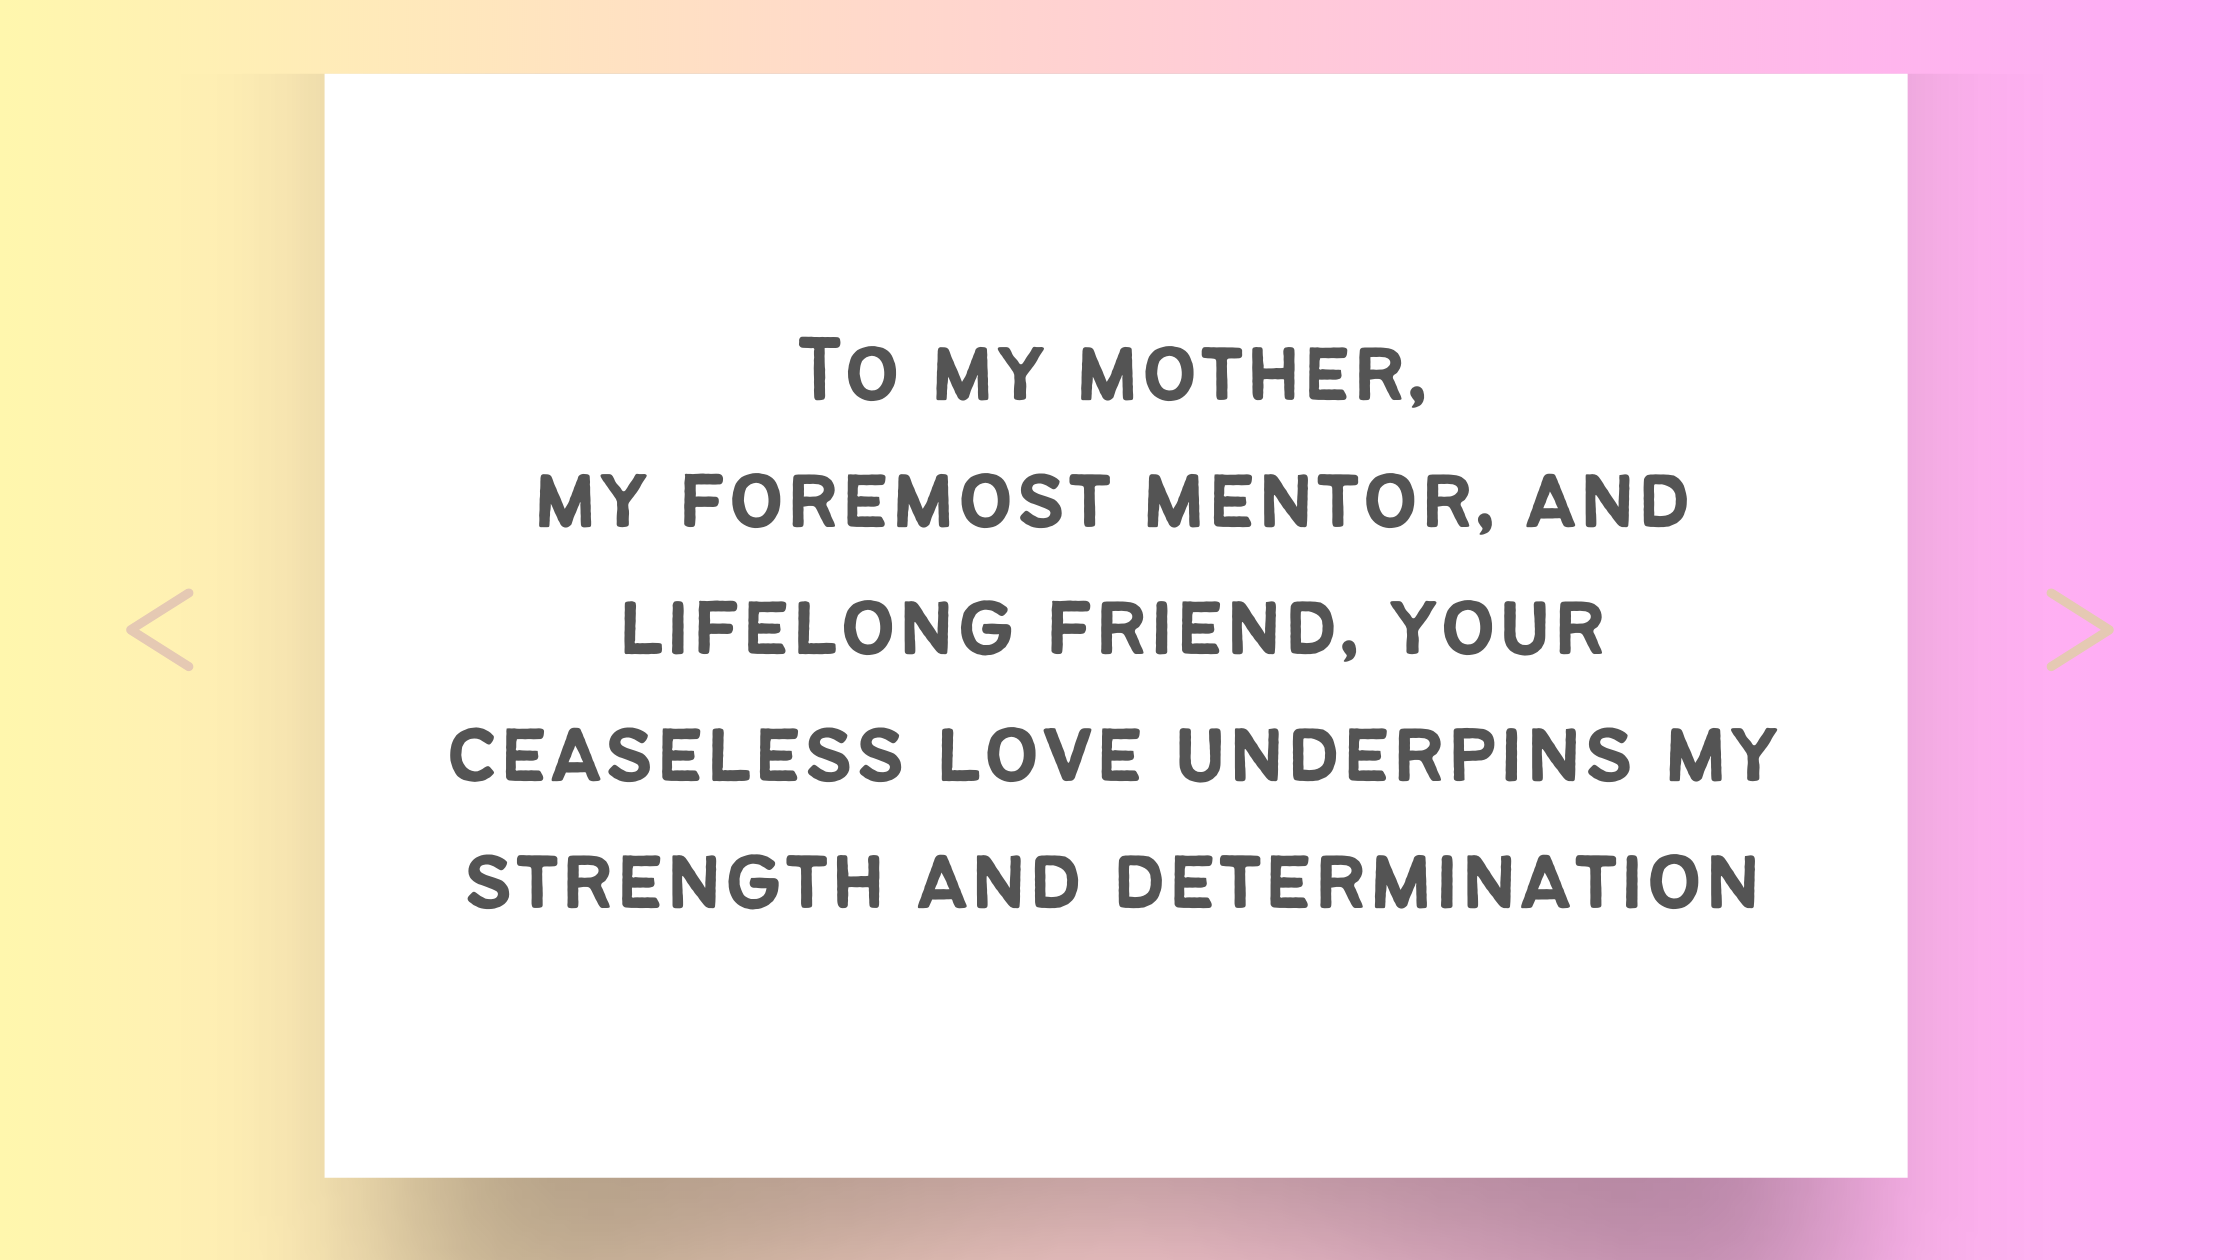 10 Heartfelt and Touching Quotes to Mother from Son: Declarations of Unending Love